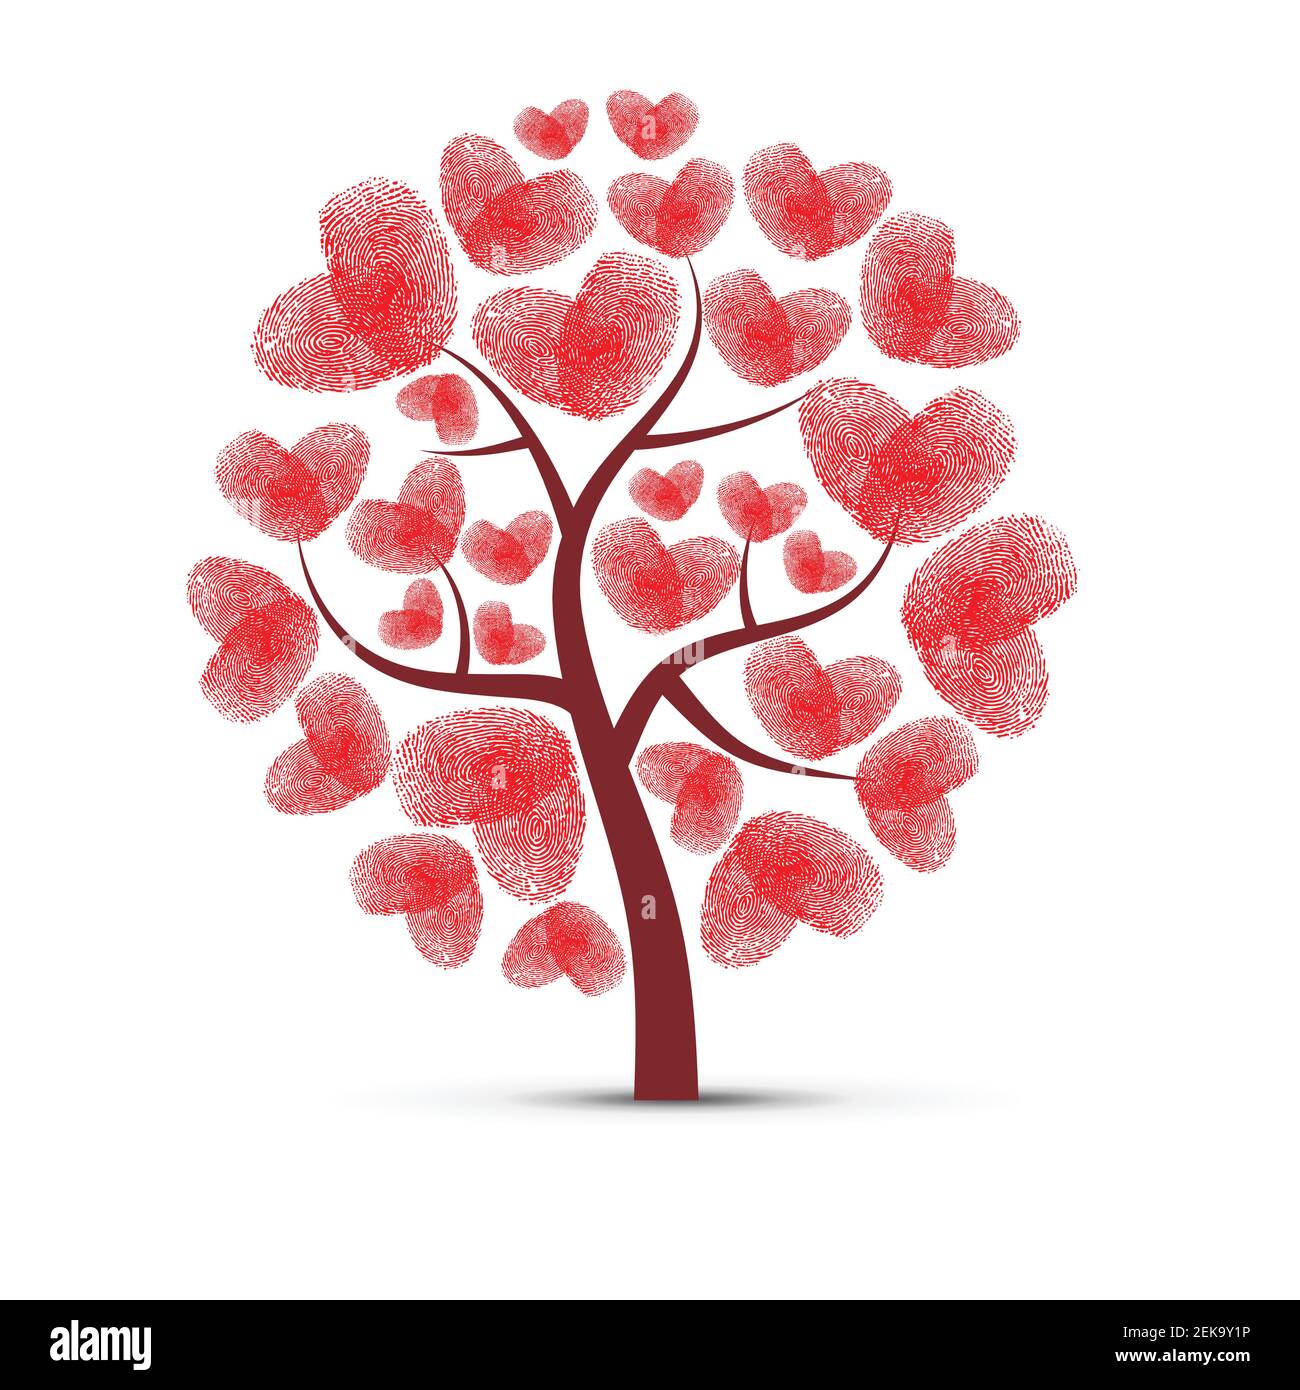 Heart Fingerprint Trees by Artistic Expression